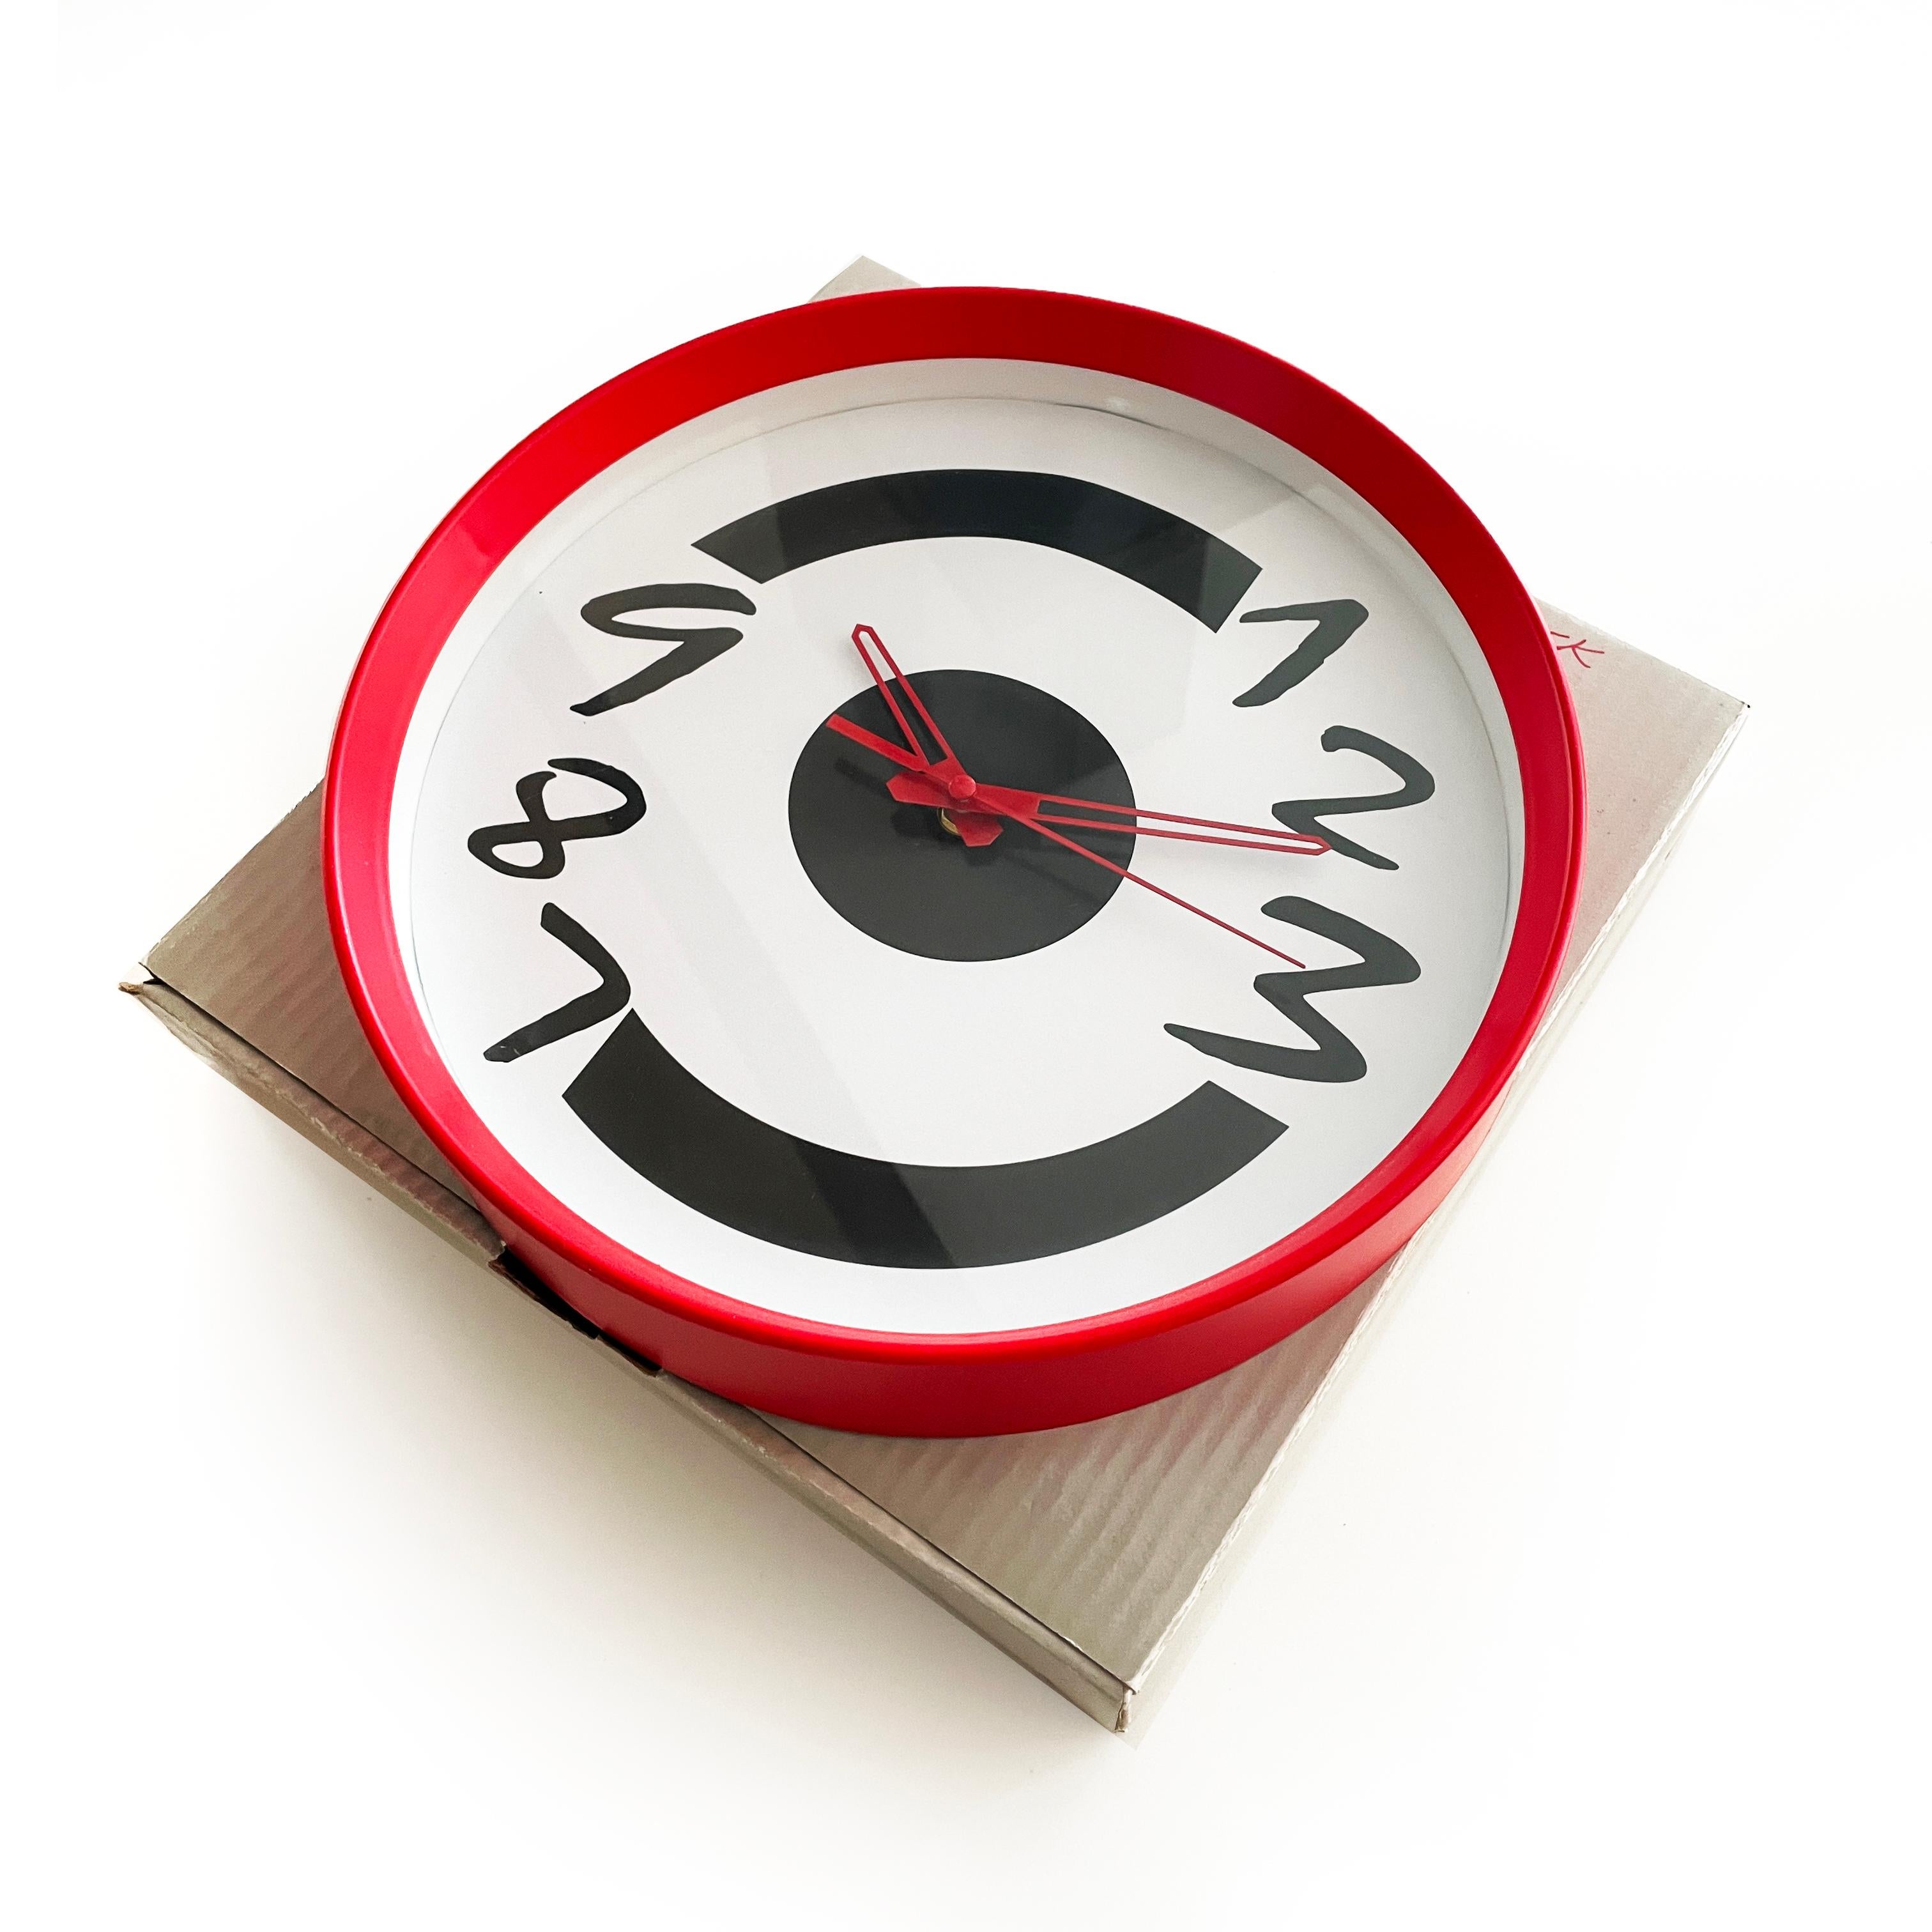 A super fun new old stock 1980s or 1990s clock. Red case, white face with stylized black numbers, and red hands. In very good vintage and unused condition in original box. Takes a single AA battery.

12” x 12” x 3”